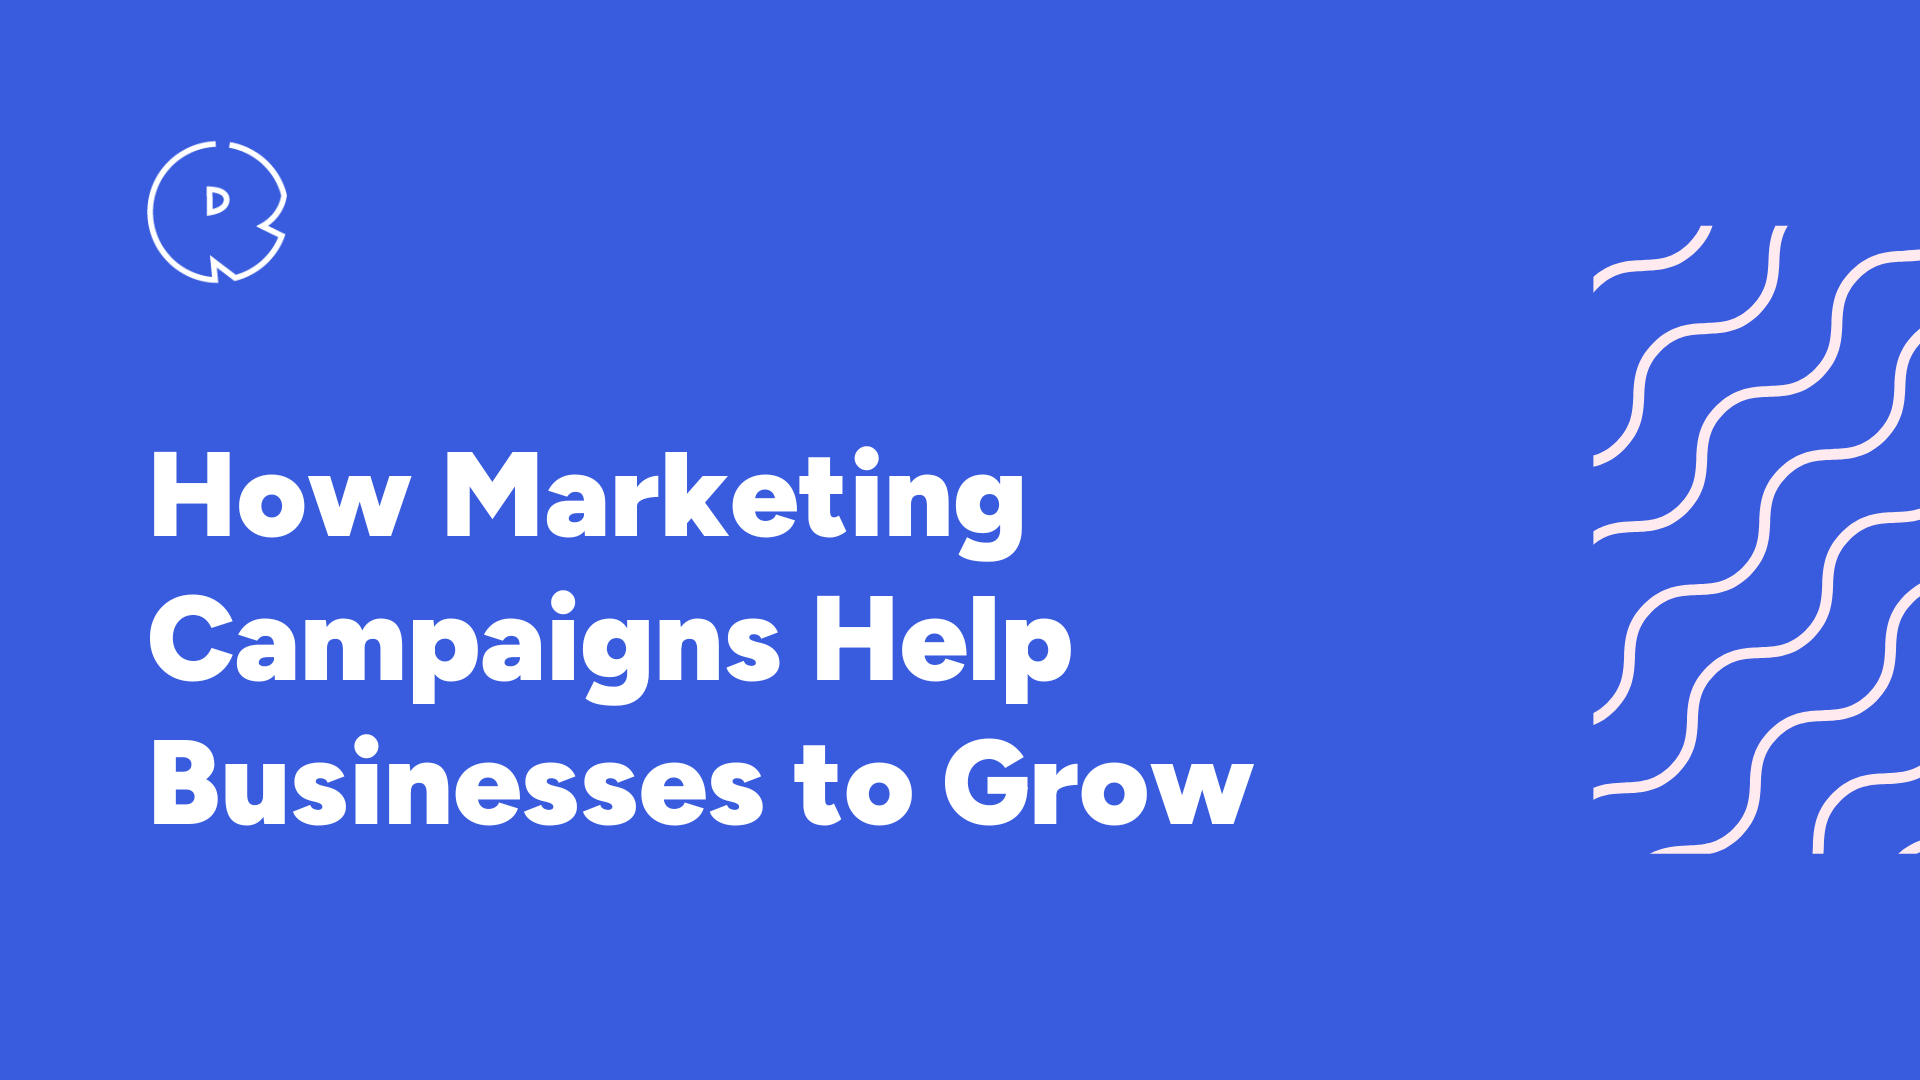 How Marketing Campaigns Help Businesses to Grow